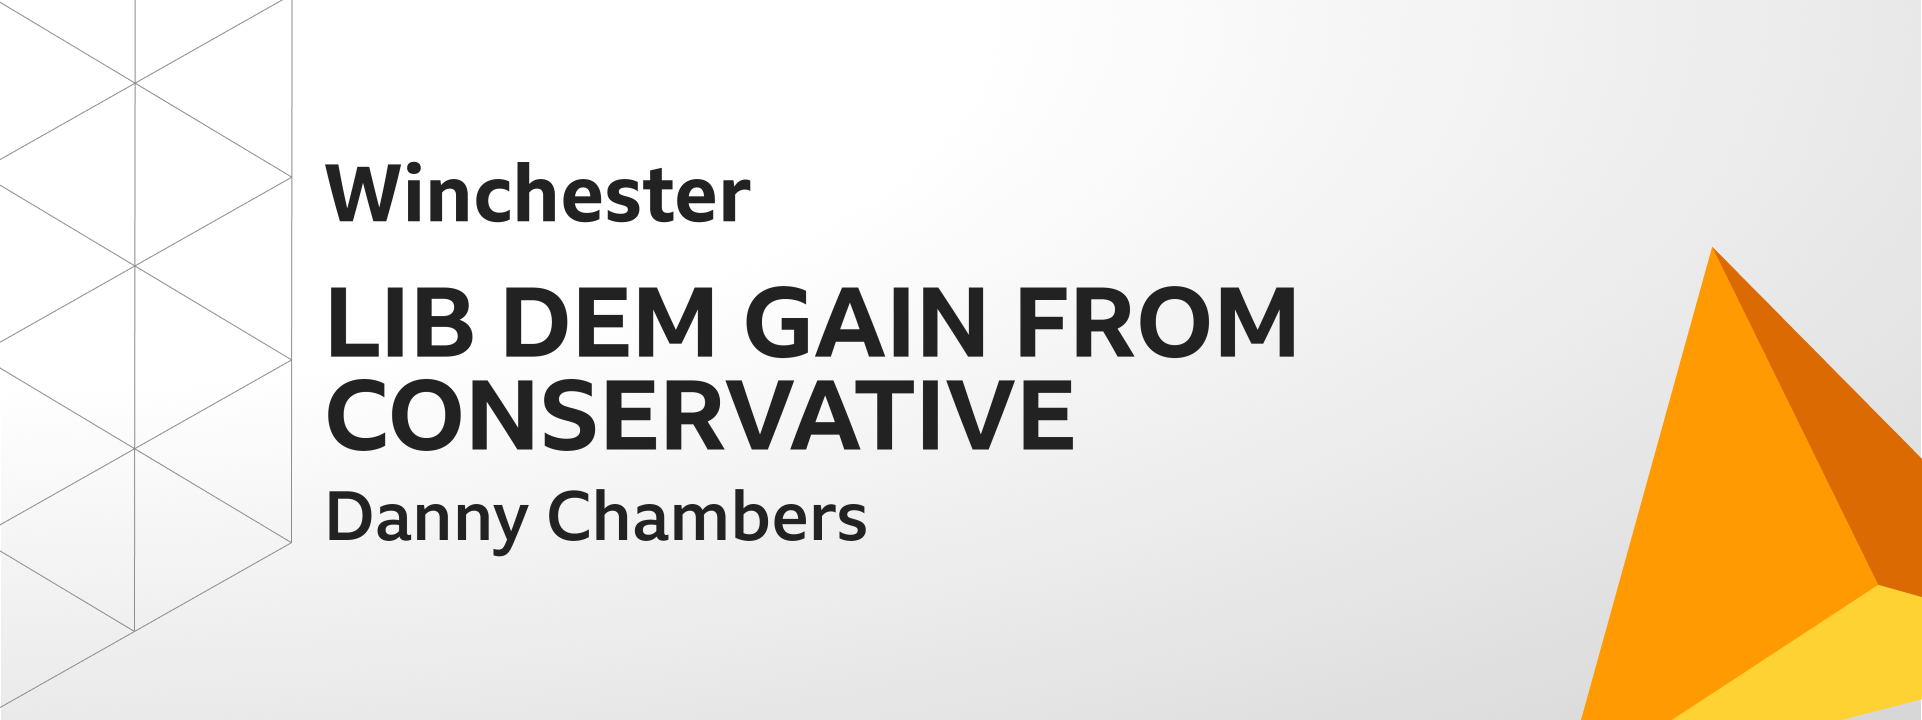 Graphic showing Liberal Democrats gain Winchester from the Conservatives. The winning candidate was Danny Chambers.